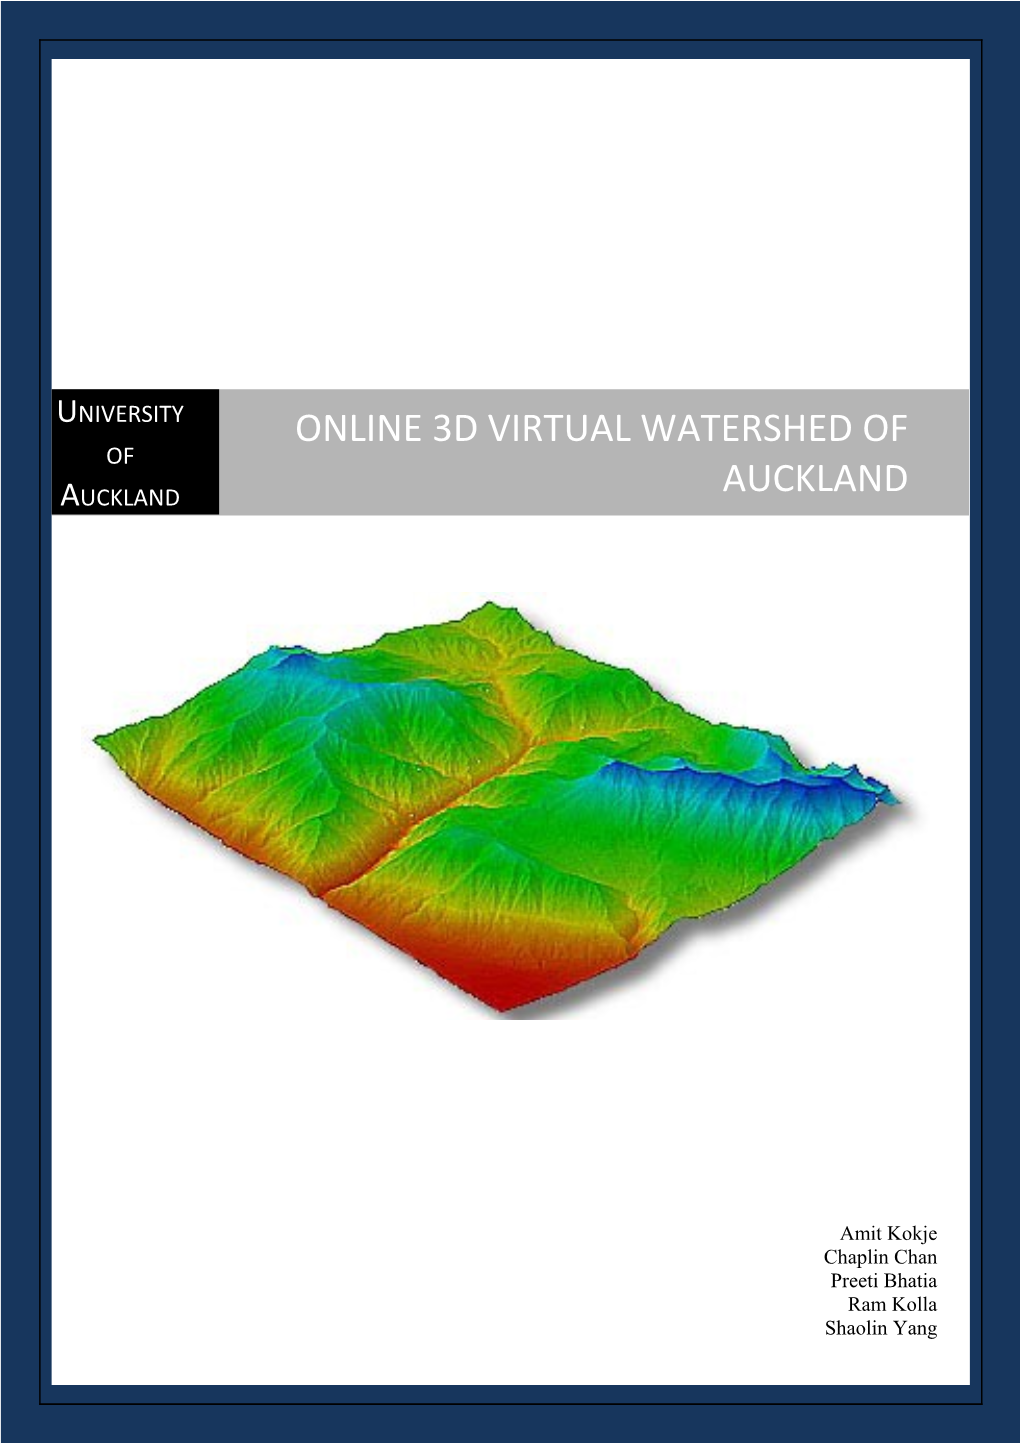 The Objective Is to Create a Web Based Application Using a Light Detection and Radar (LIDAR)